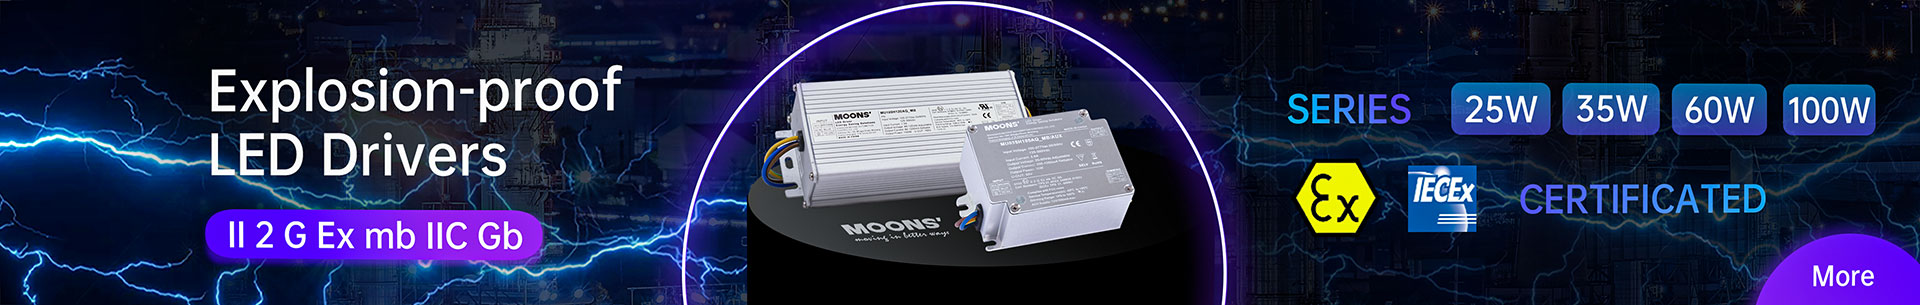 Explosion-proof LED Drivers